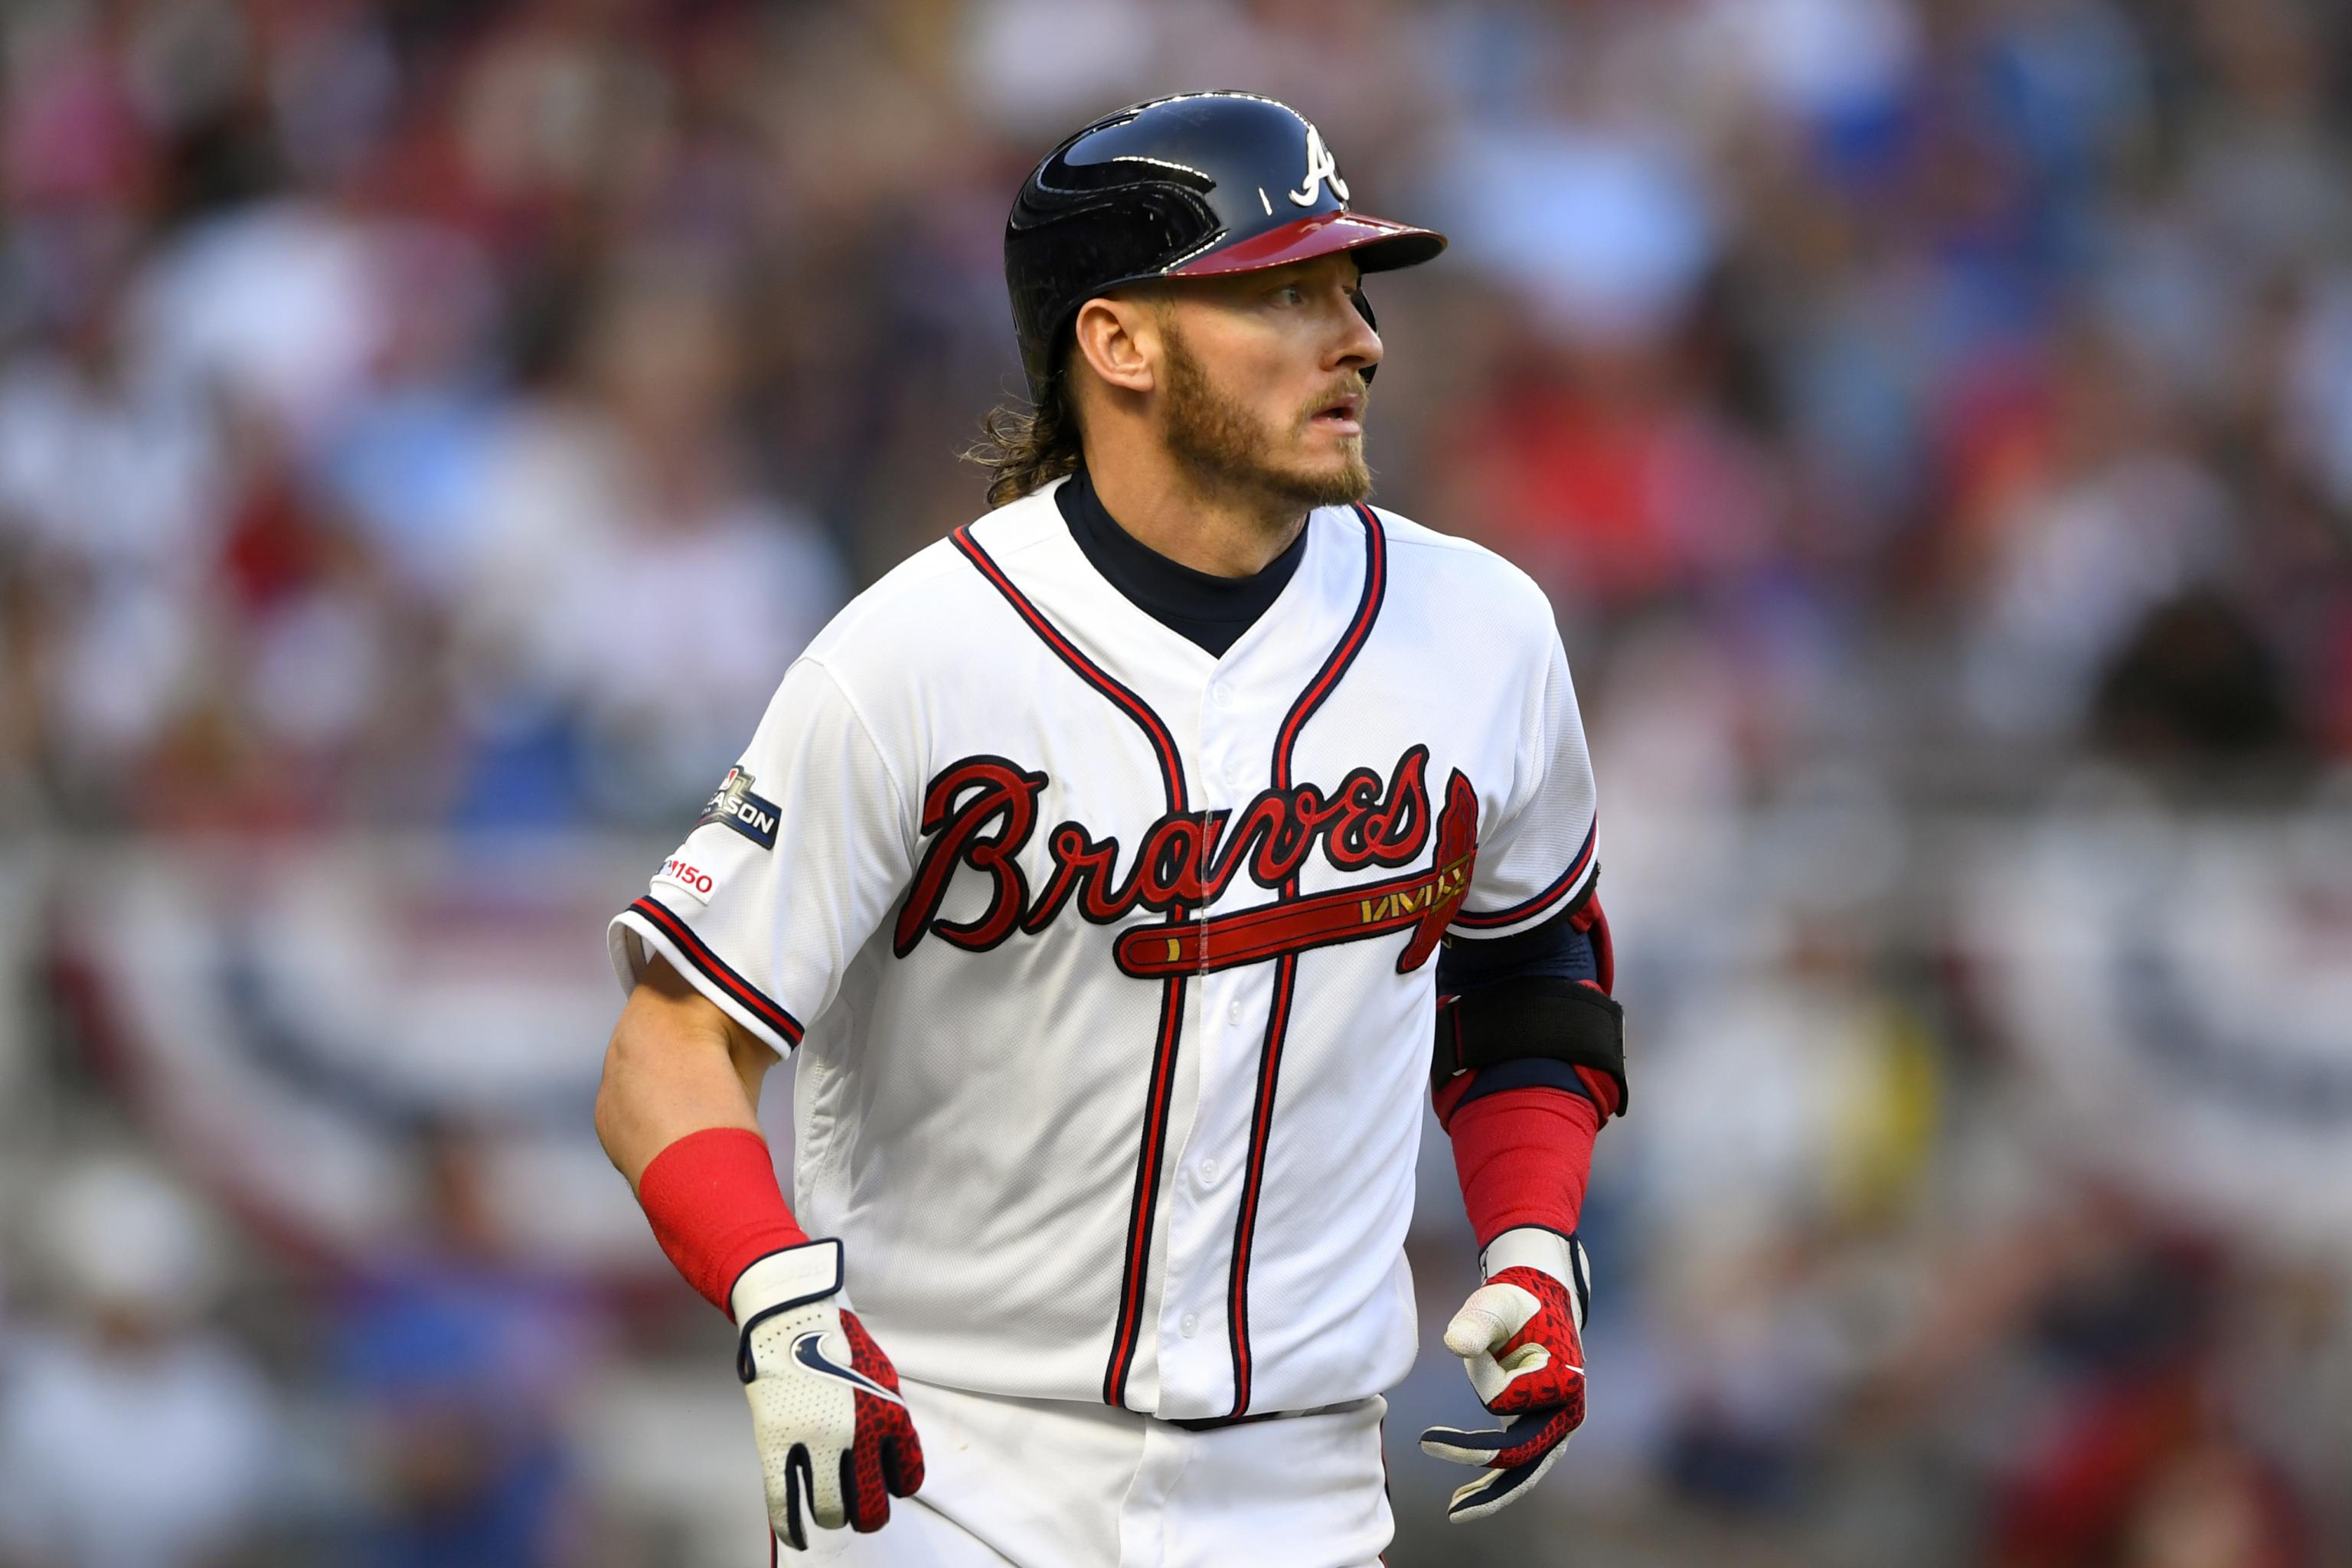 Braves: What will a Josh Donaldson contract extension look like